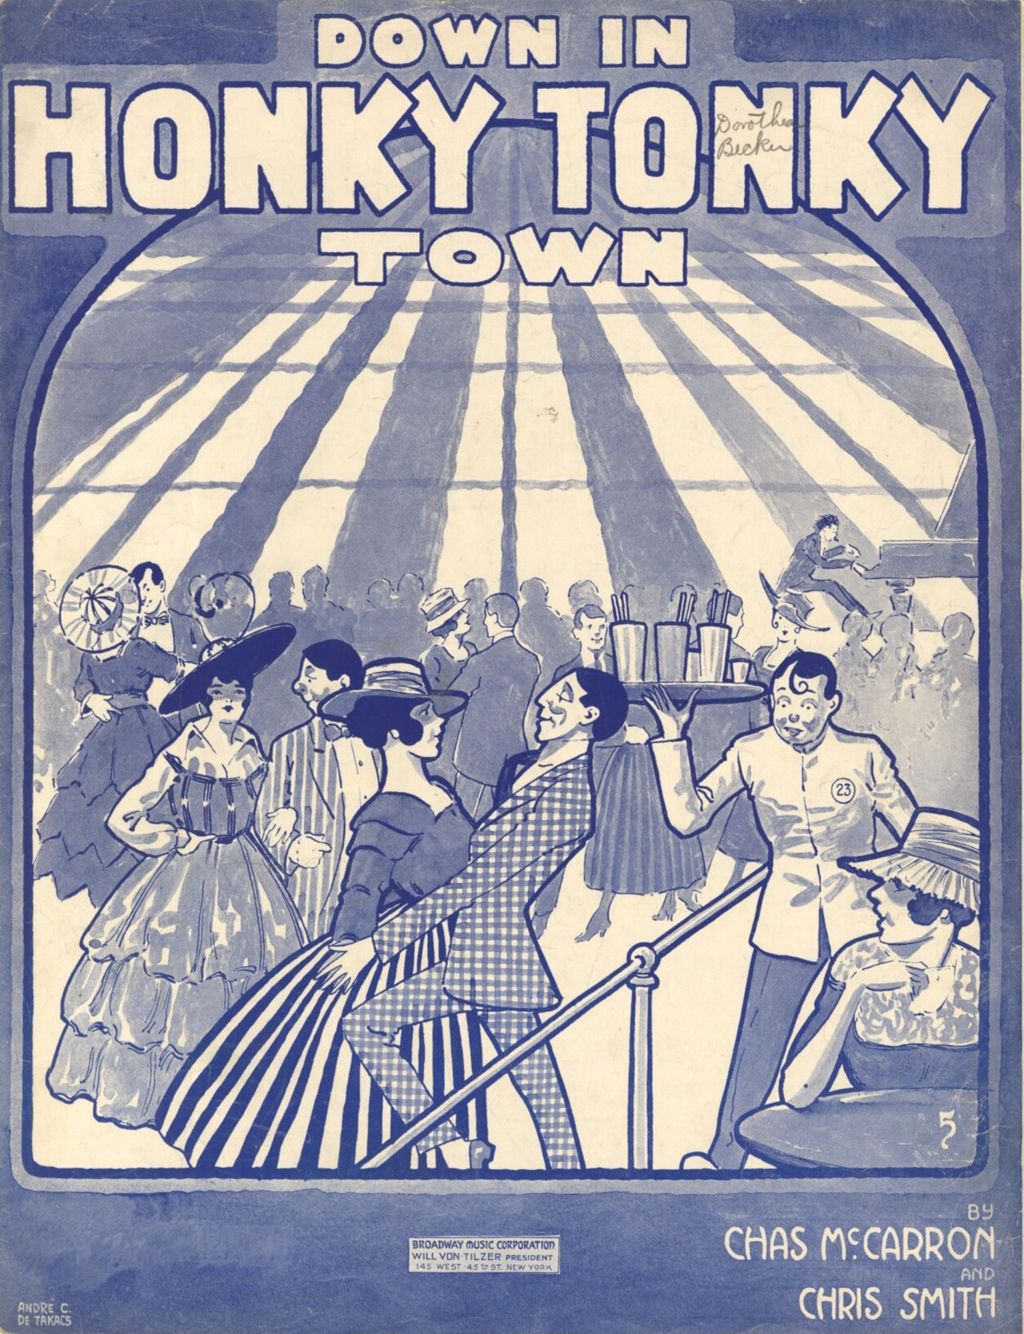 Miniature of Down in Honky Tonky Town